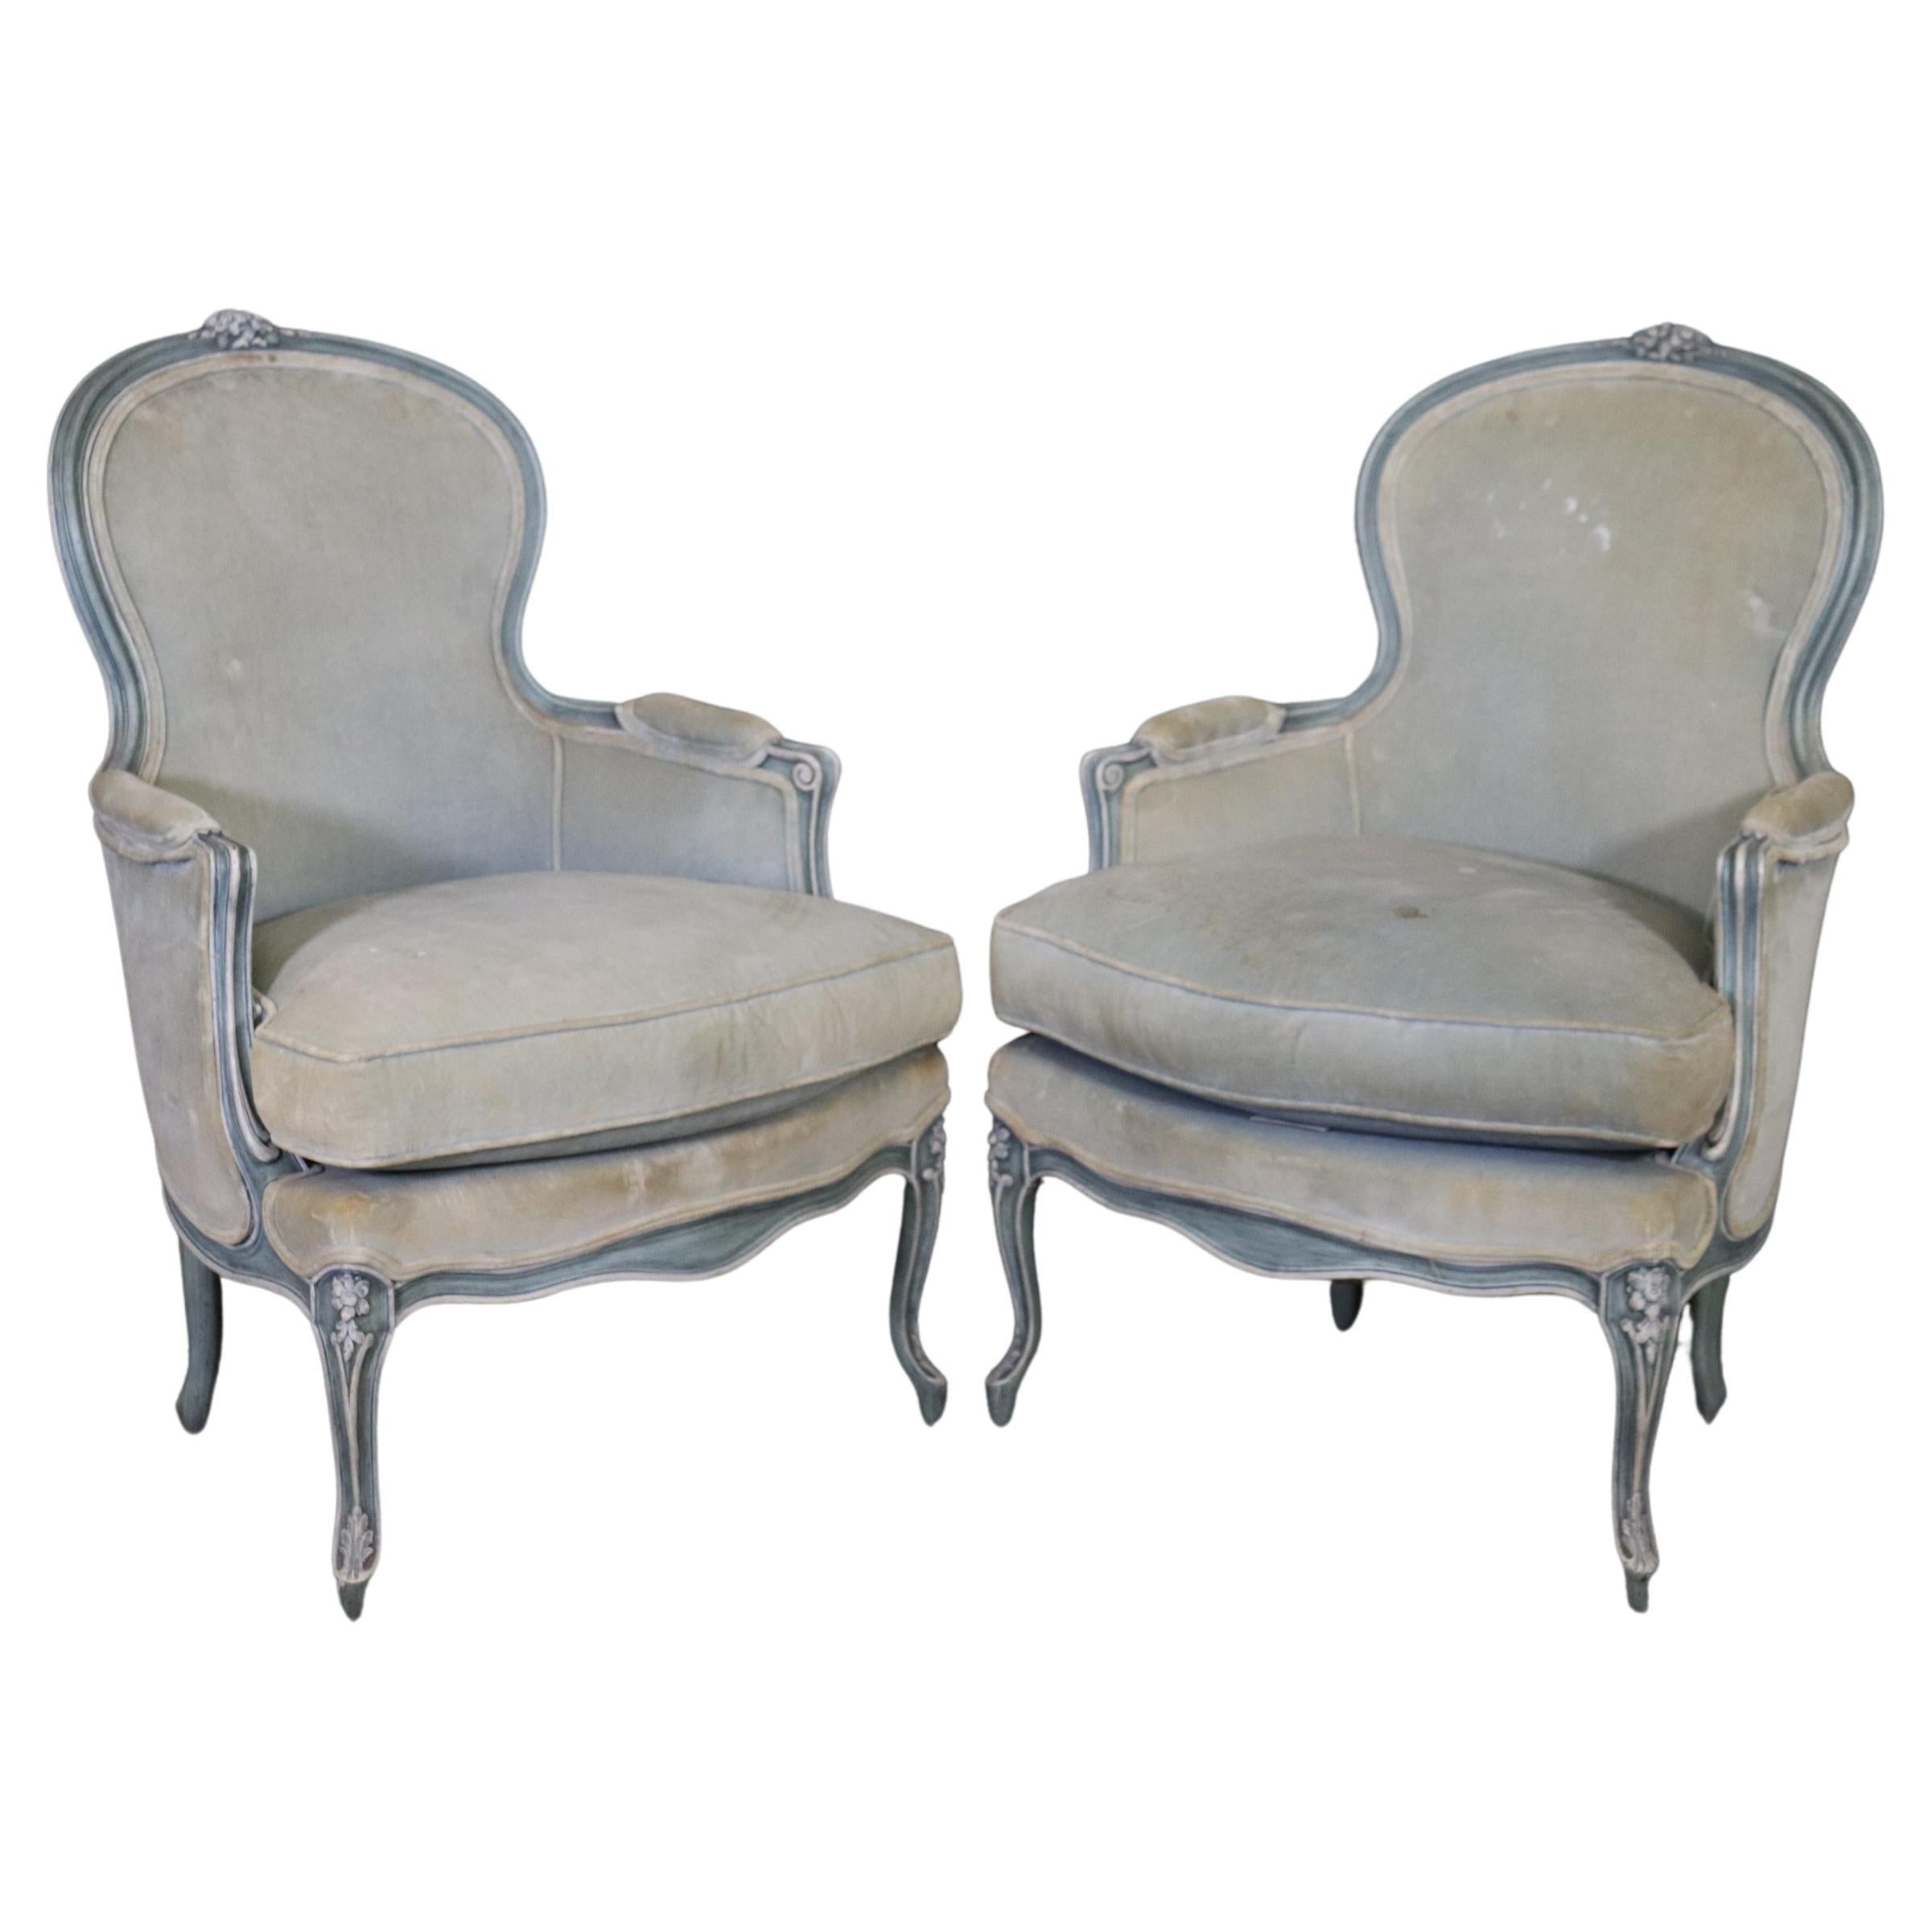 Pair Blue and White Antique Pair Balloon Back French Louis XV Bergere Chairs